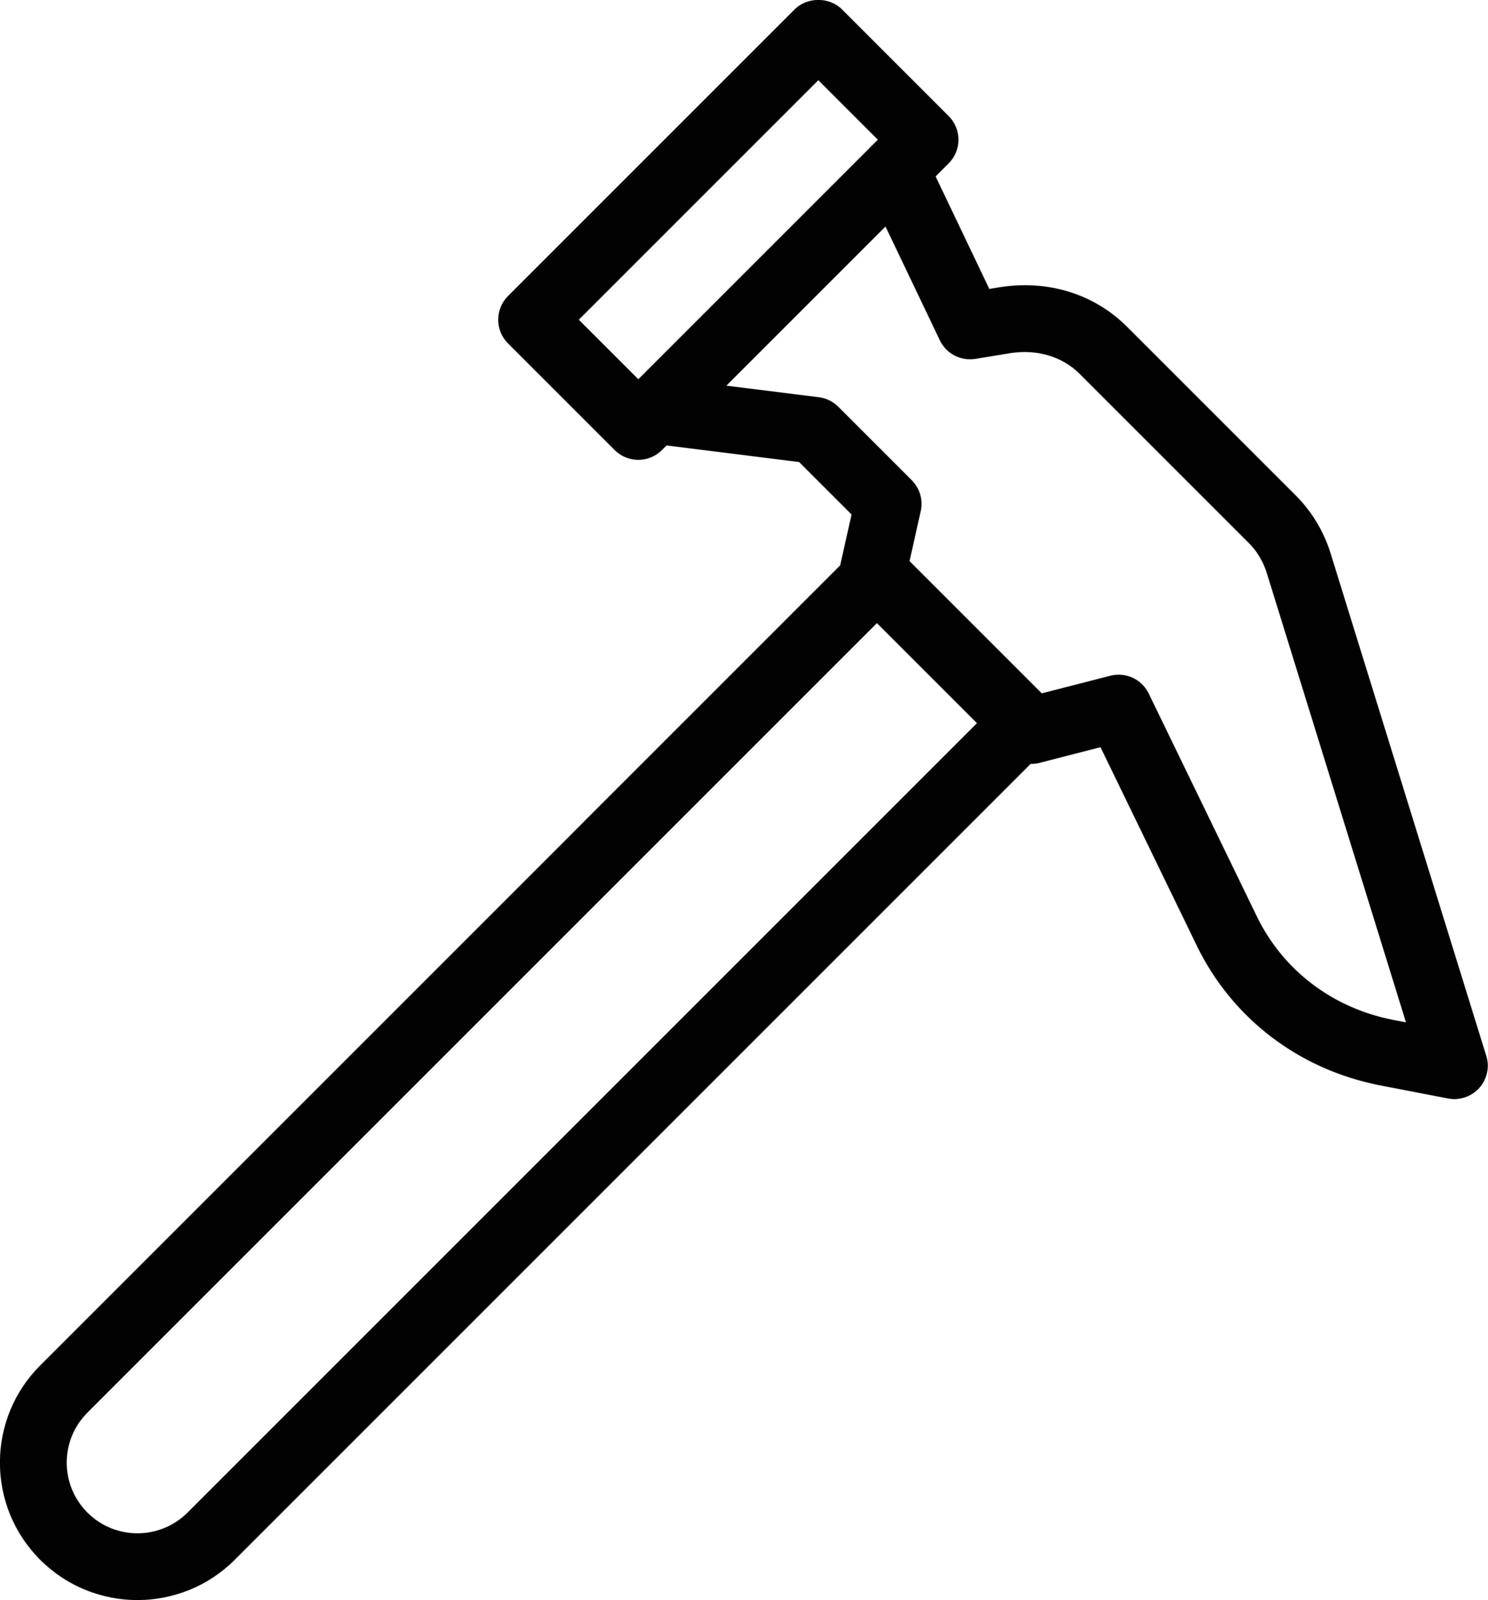 hammer Vector illustration on a transparent background. Premium quality symmbols. Thin line vector icons for concept and graphic design.